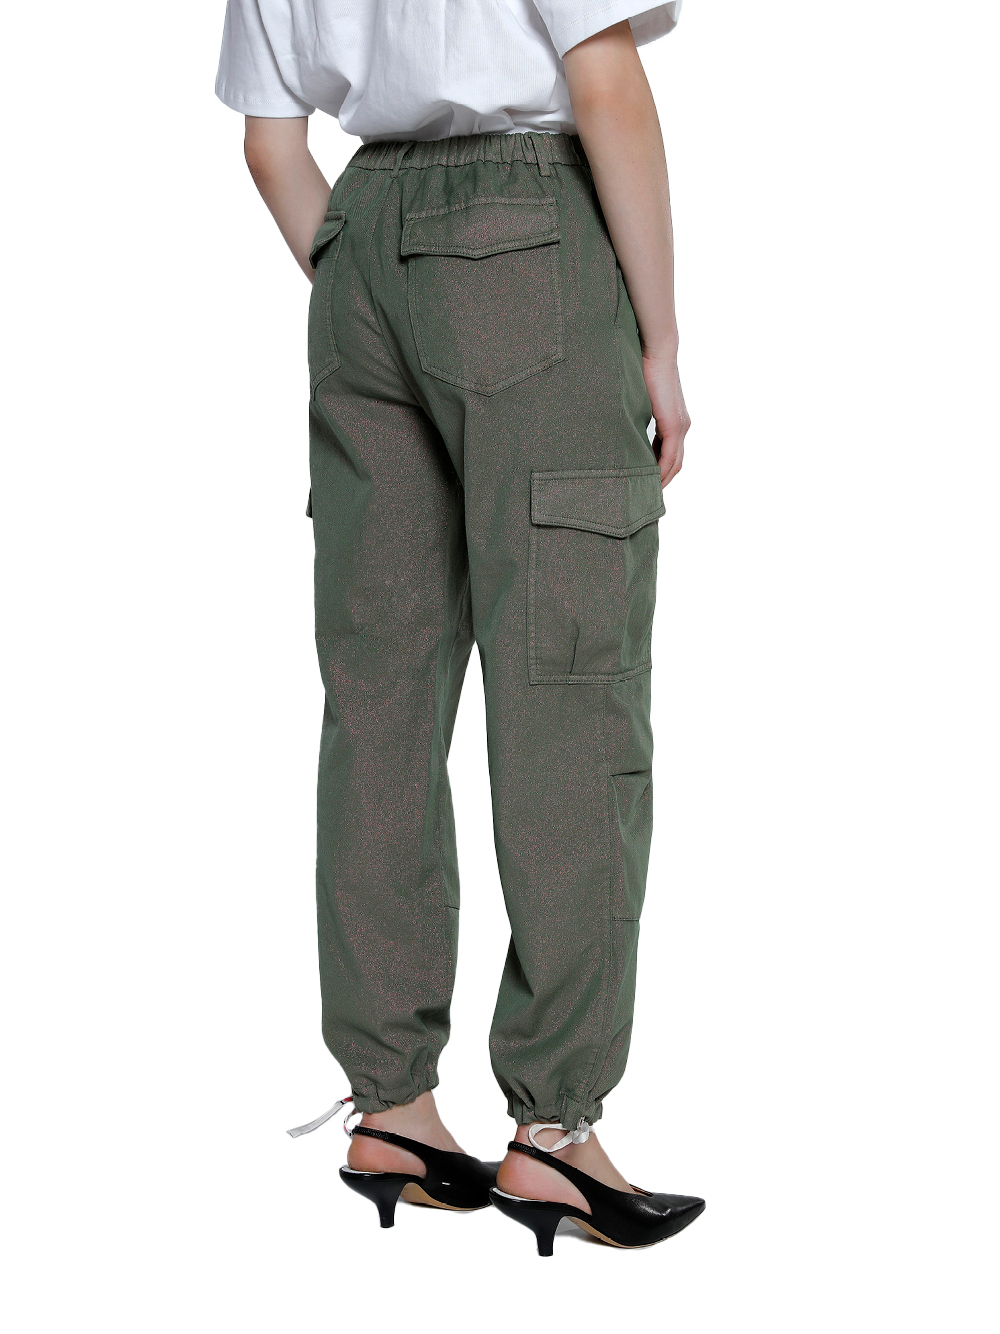 I Love My Pants I LOVE MY PANTS- Cotton Cargo Trousers